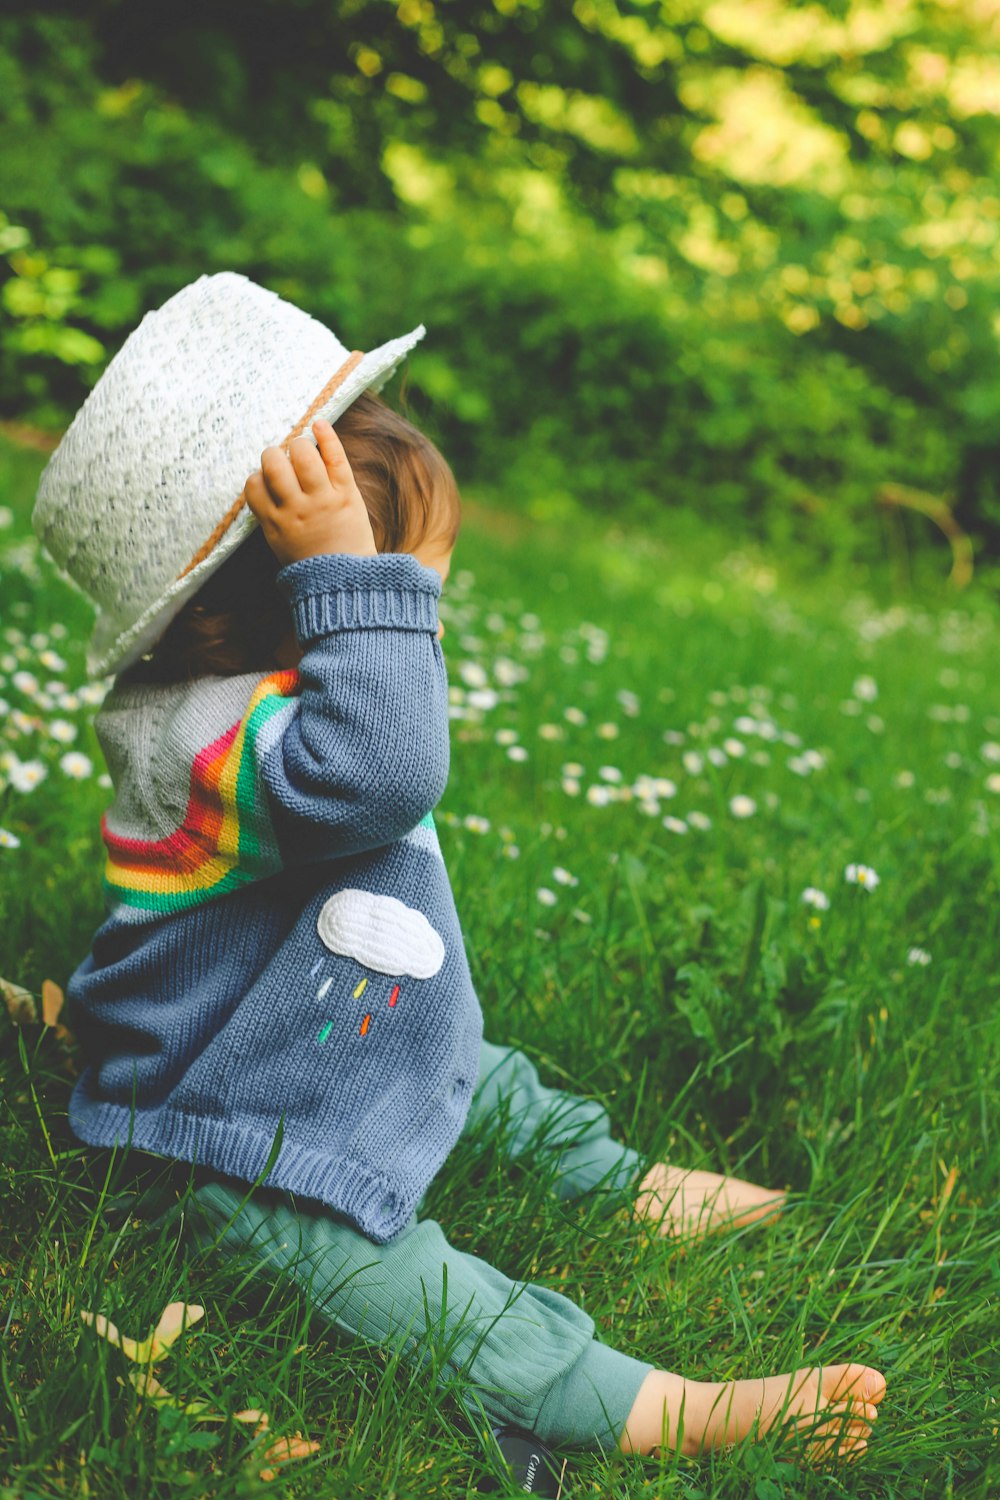 child in gray jacket and white hat standing on green grass field during daytime